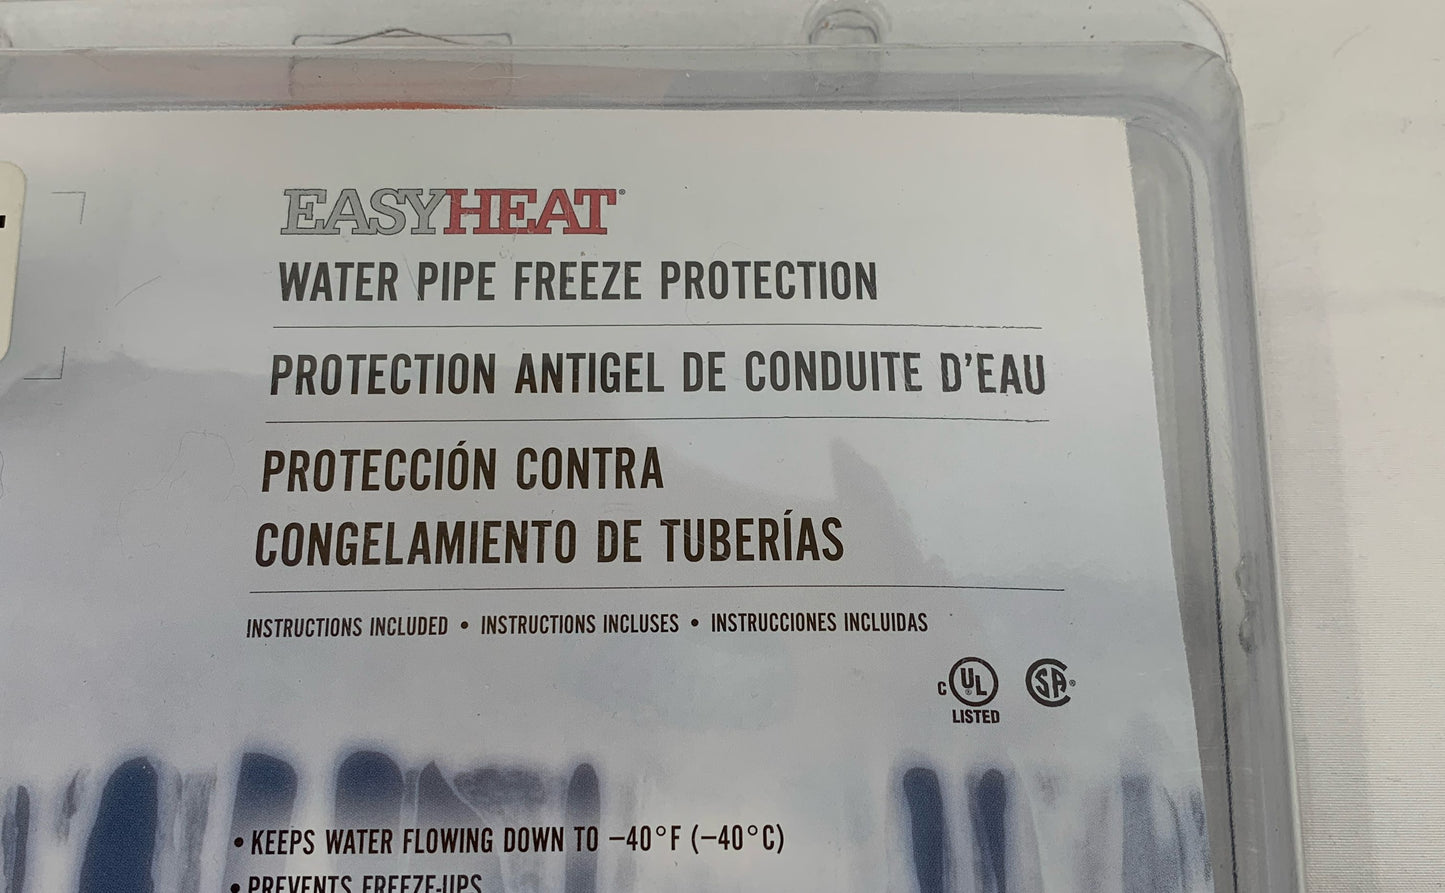 Easy Heat Emerson Water Pipe Freeze Protection 30' Ft 120 VAC AHB130